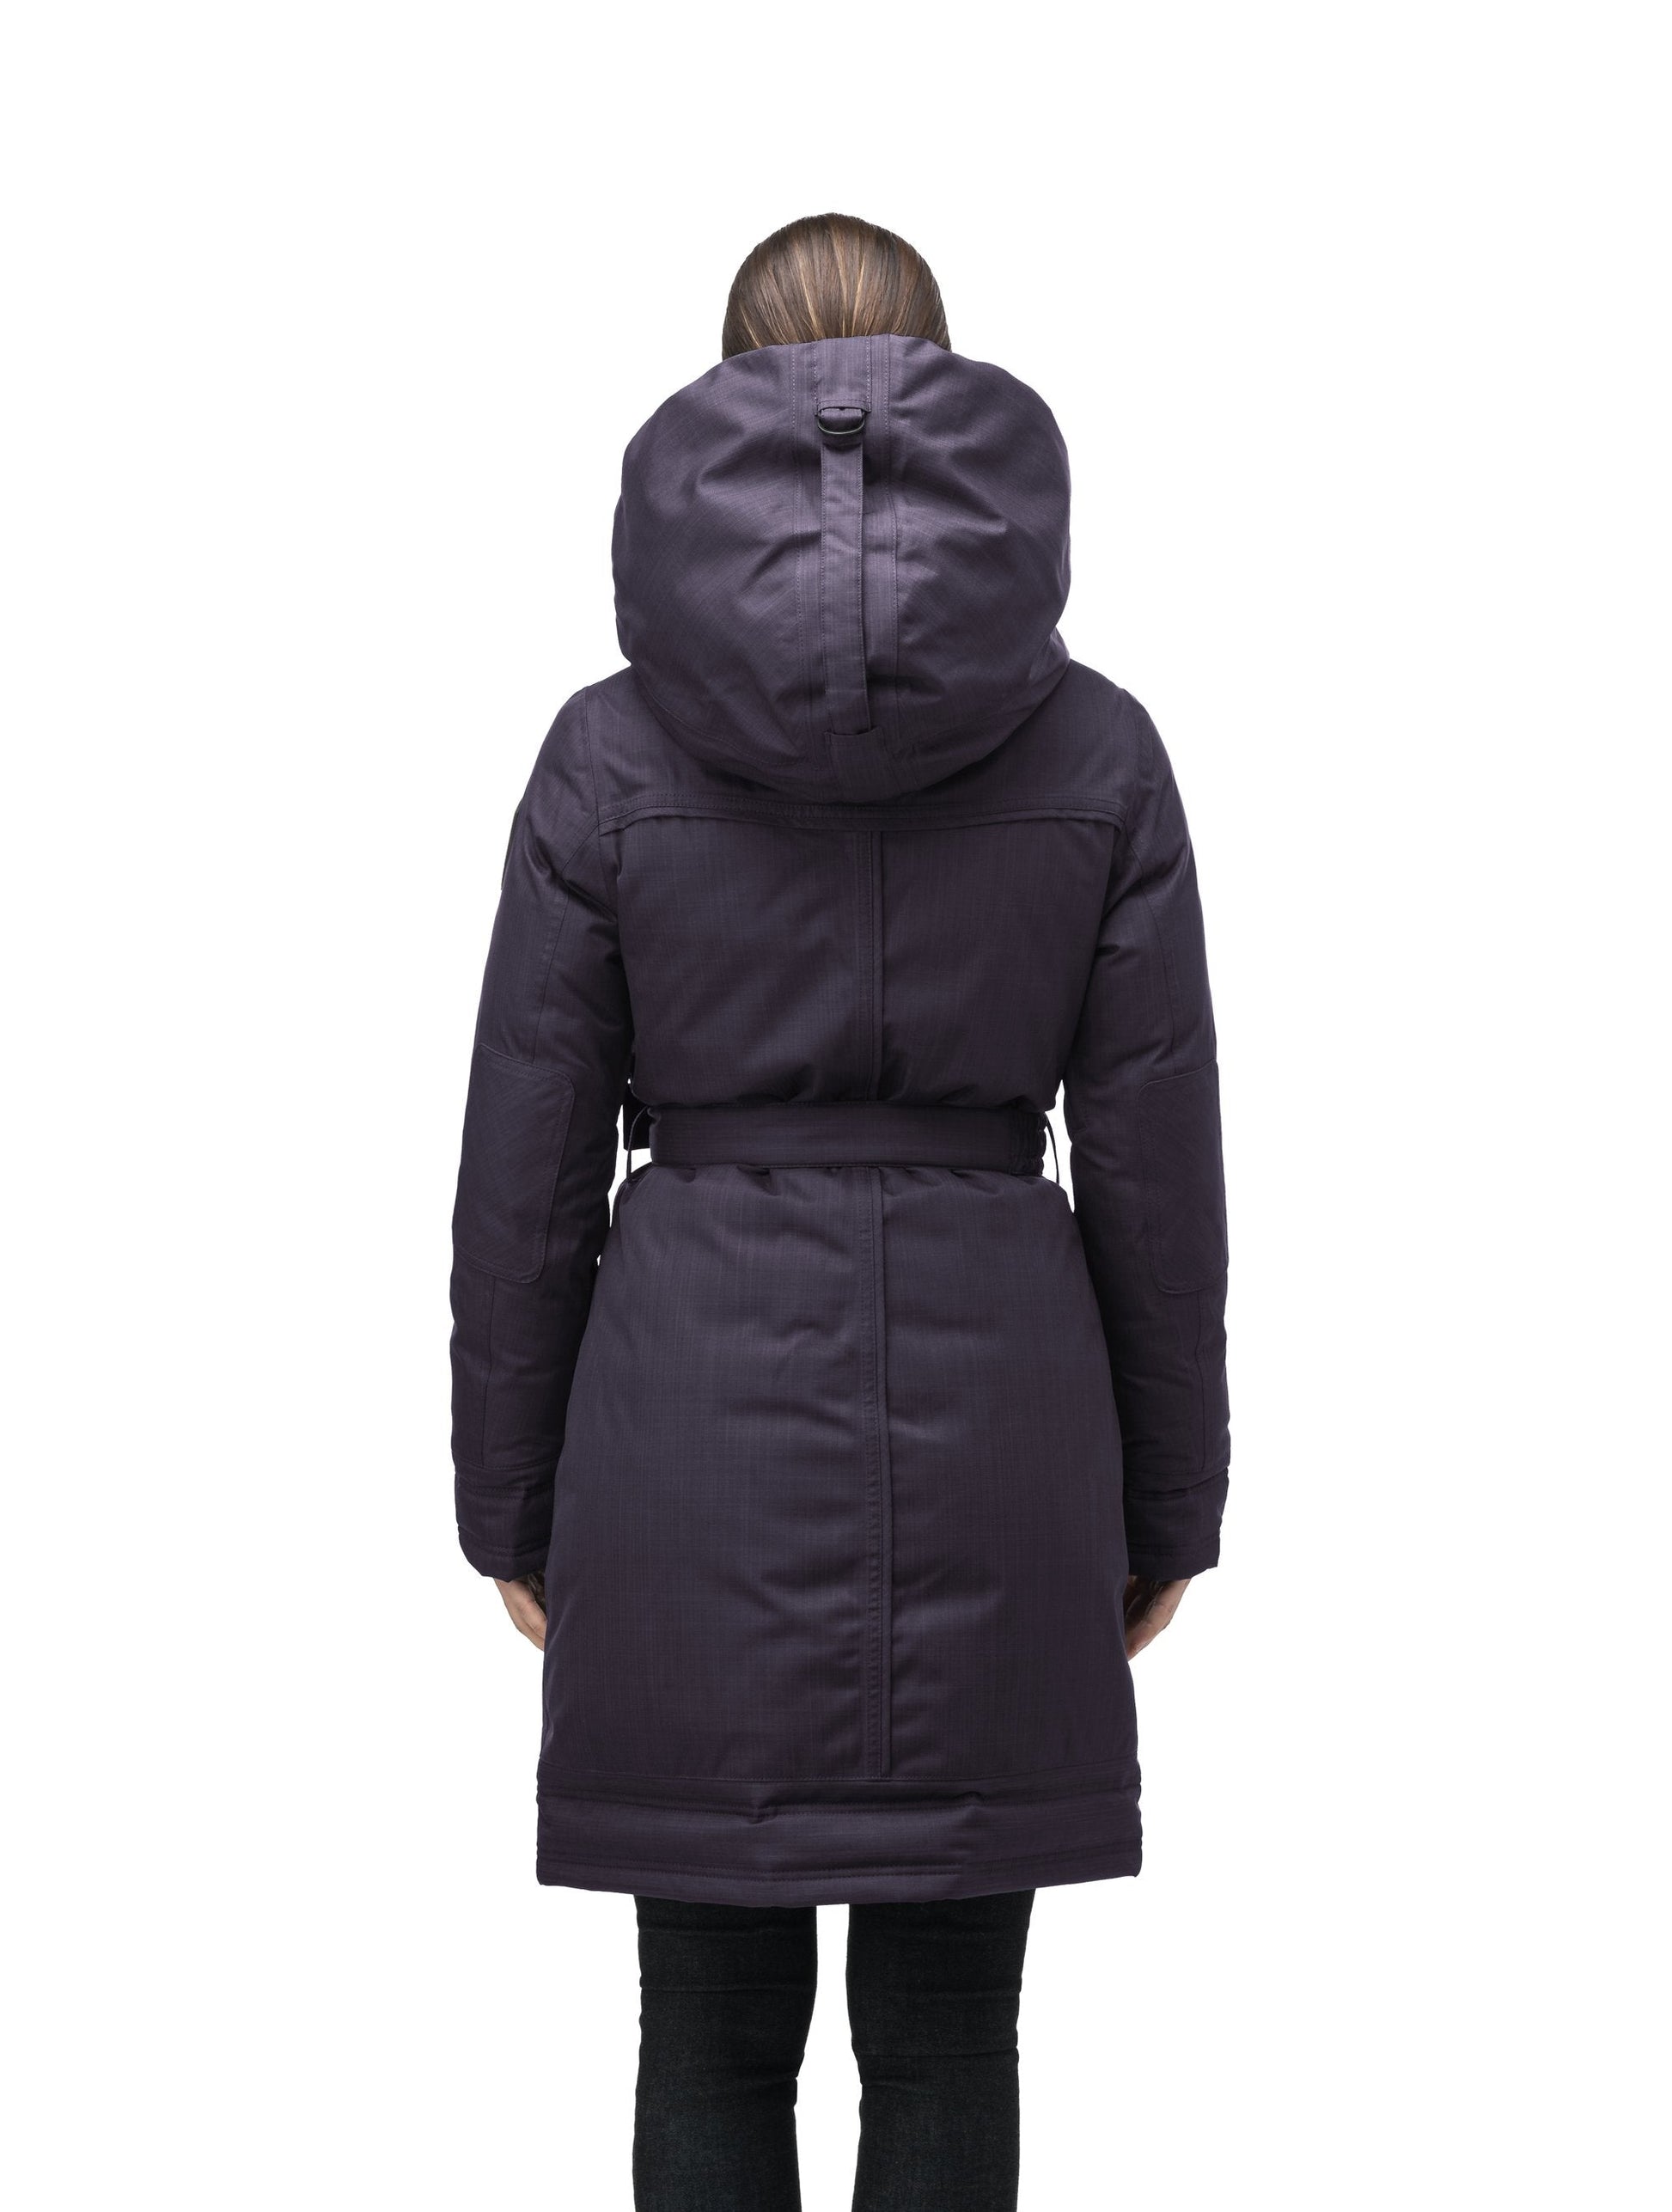 Women's Thigh length own parka with a furless oversized hood in CH Purple